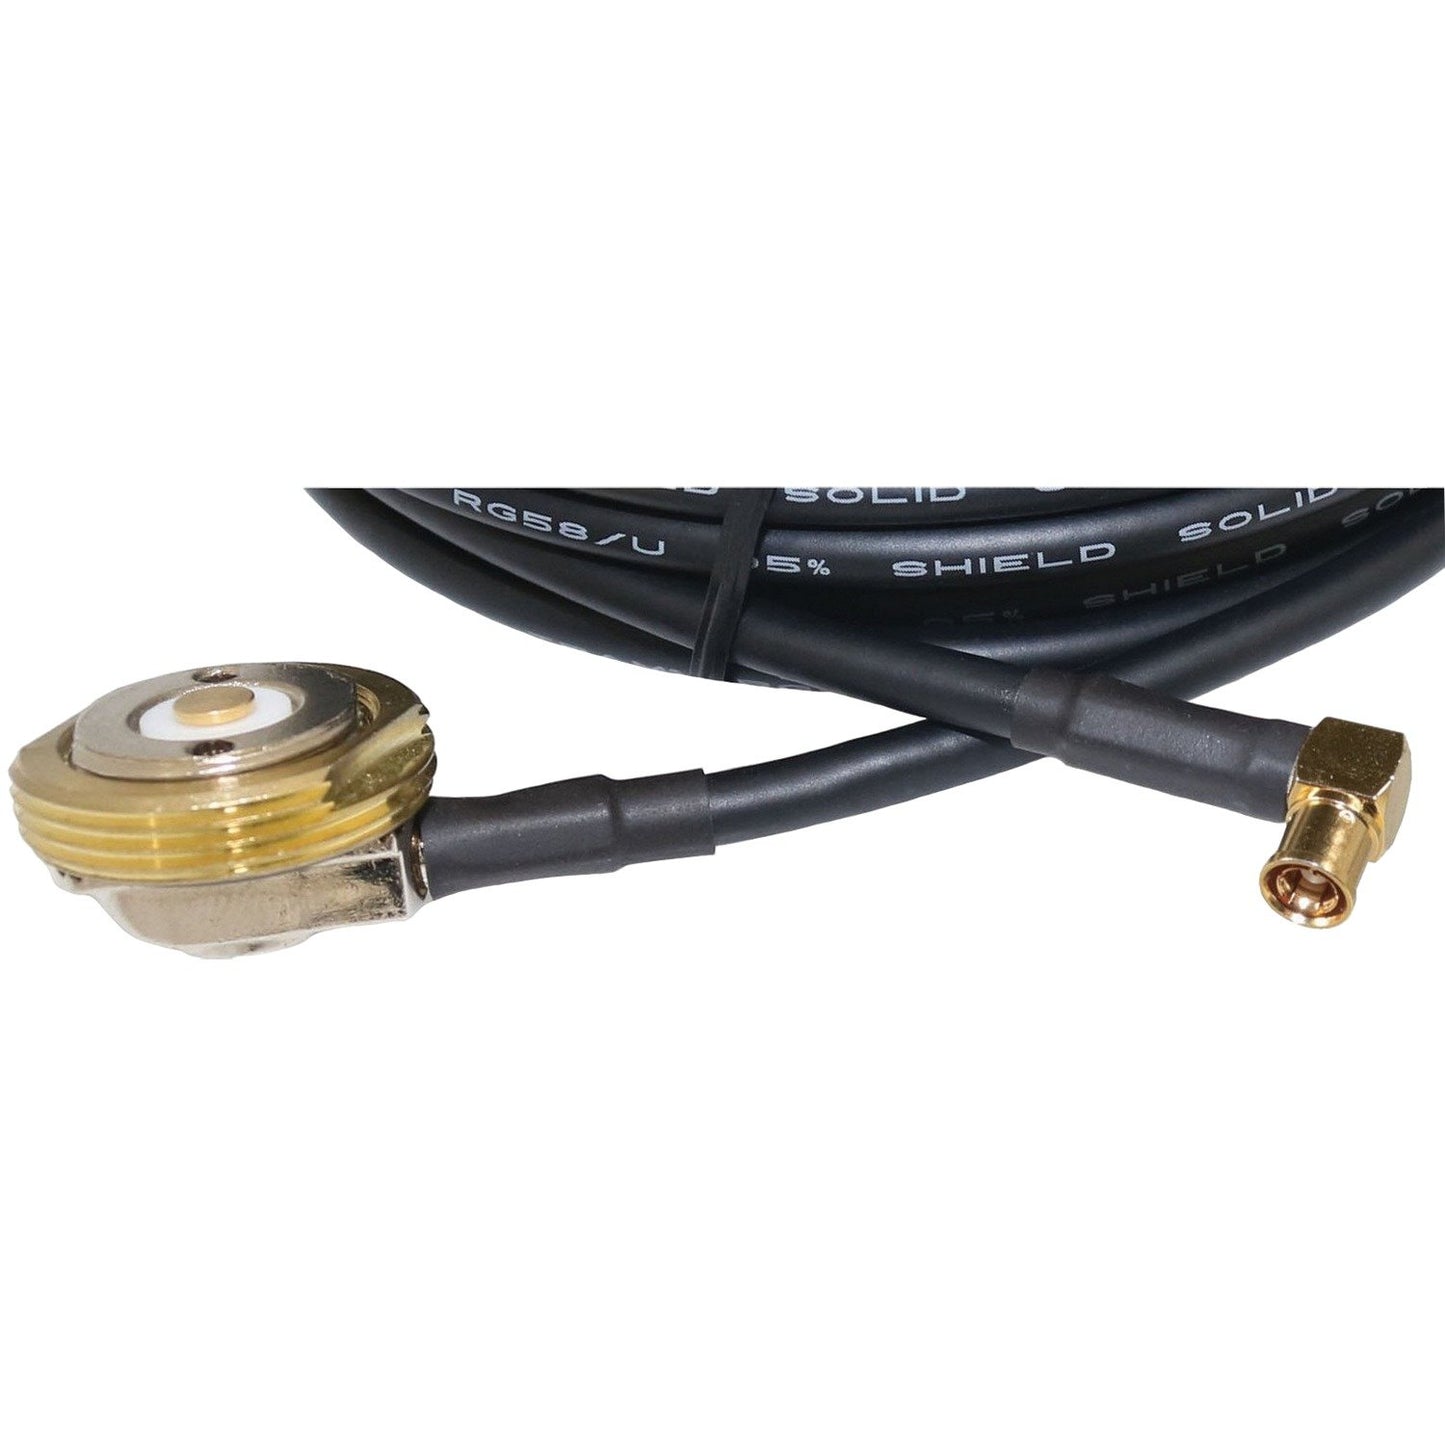 Tram 2301 Replacement NMO Mount and Cable for #7732 Satellite Radio Antenna